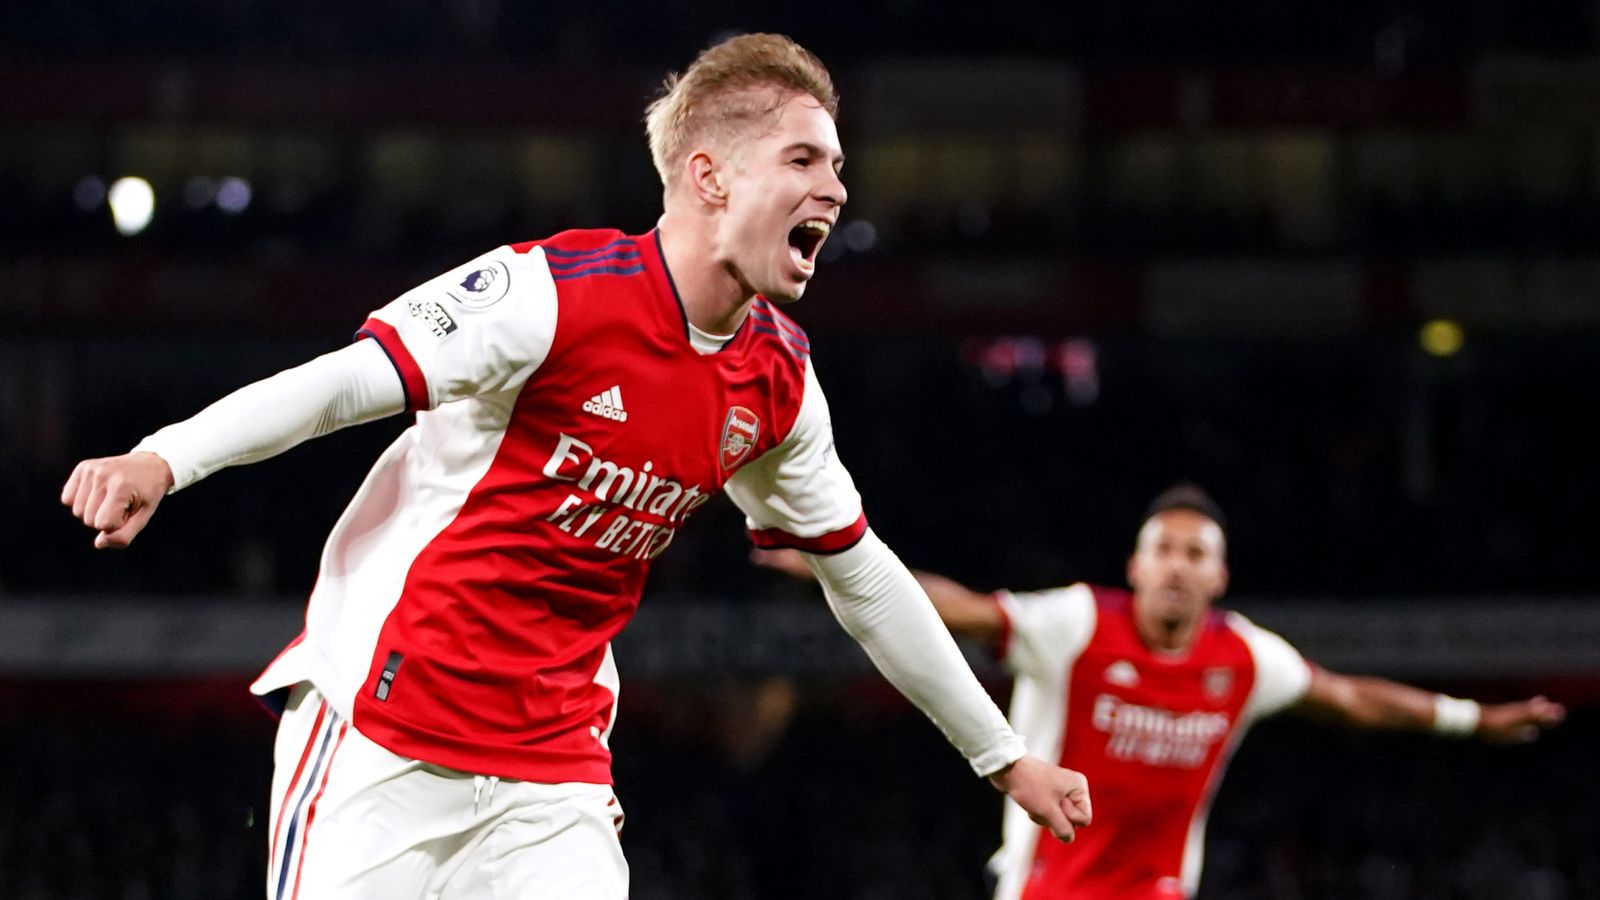 Emile Smith Rowe: England name Arsenal midfielder for the first time in World Cup qualifying with Albania and San Marino